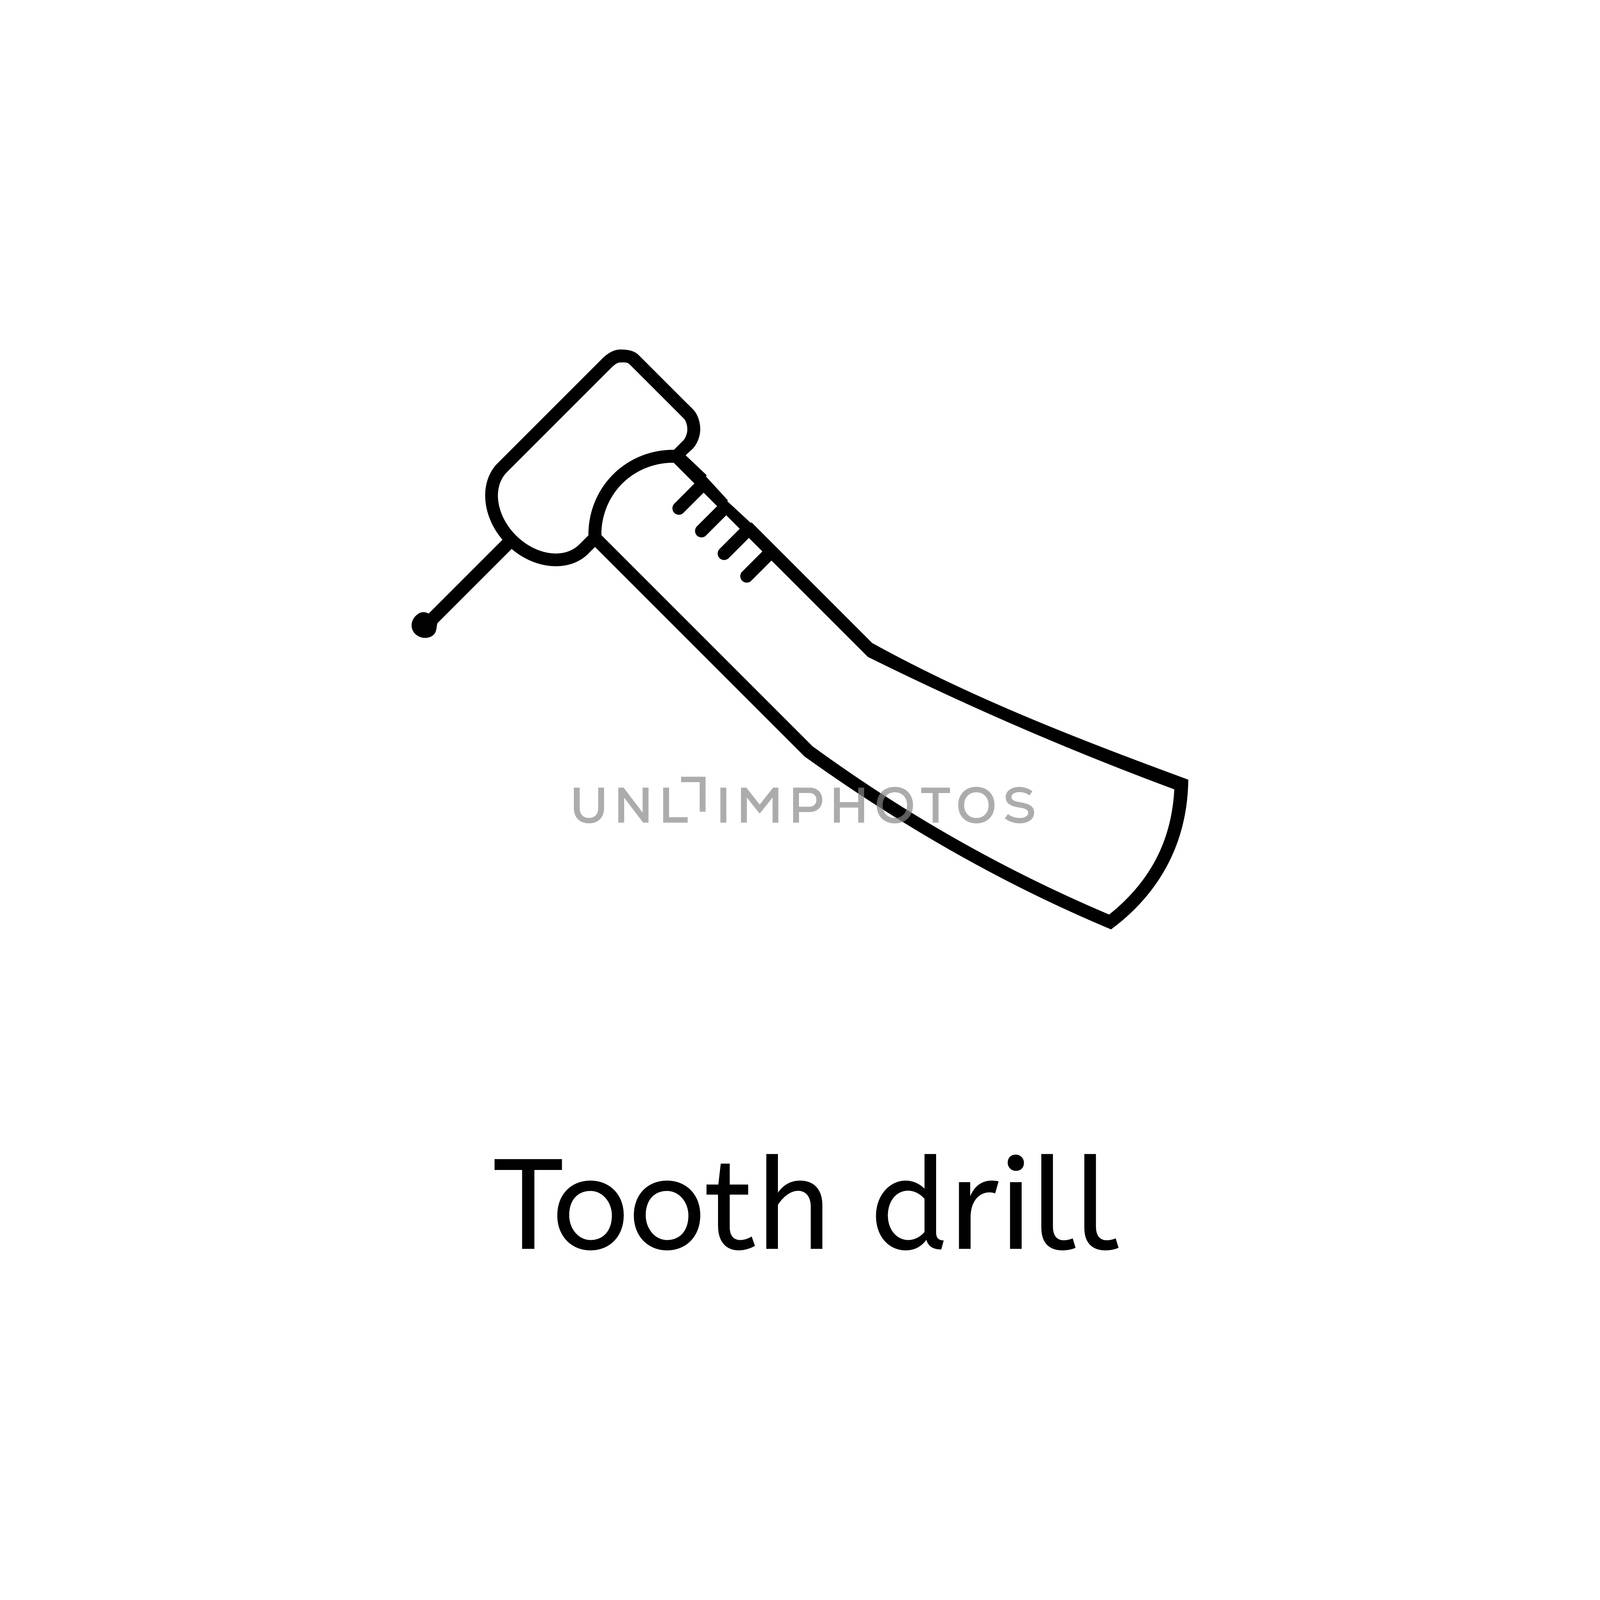 Dental drill line icon isolated on white background. Line icon for infographic, website or app. Outline symbol teeth to design a website and mobile applications. Simple dental icons on white background.